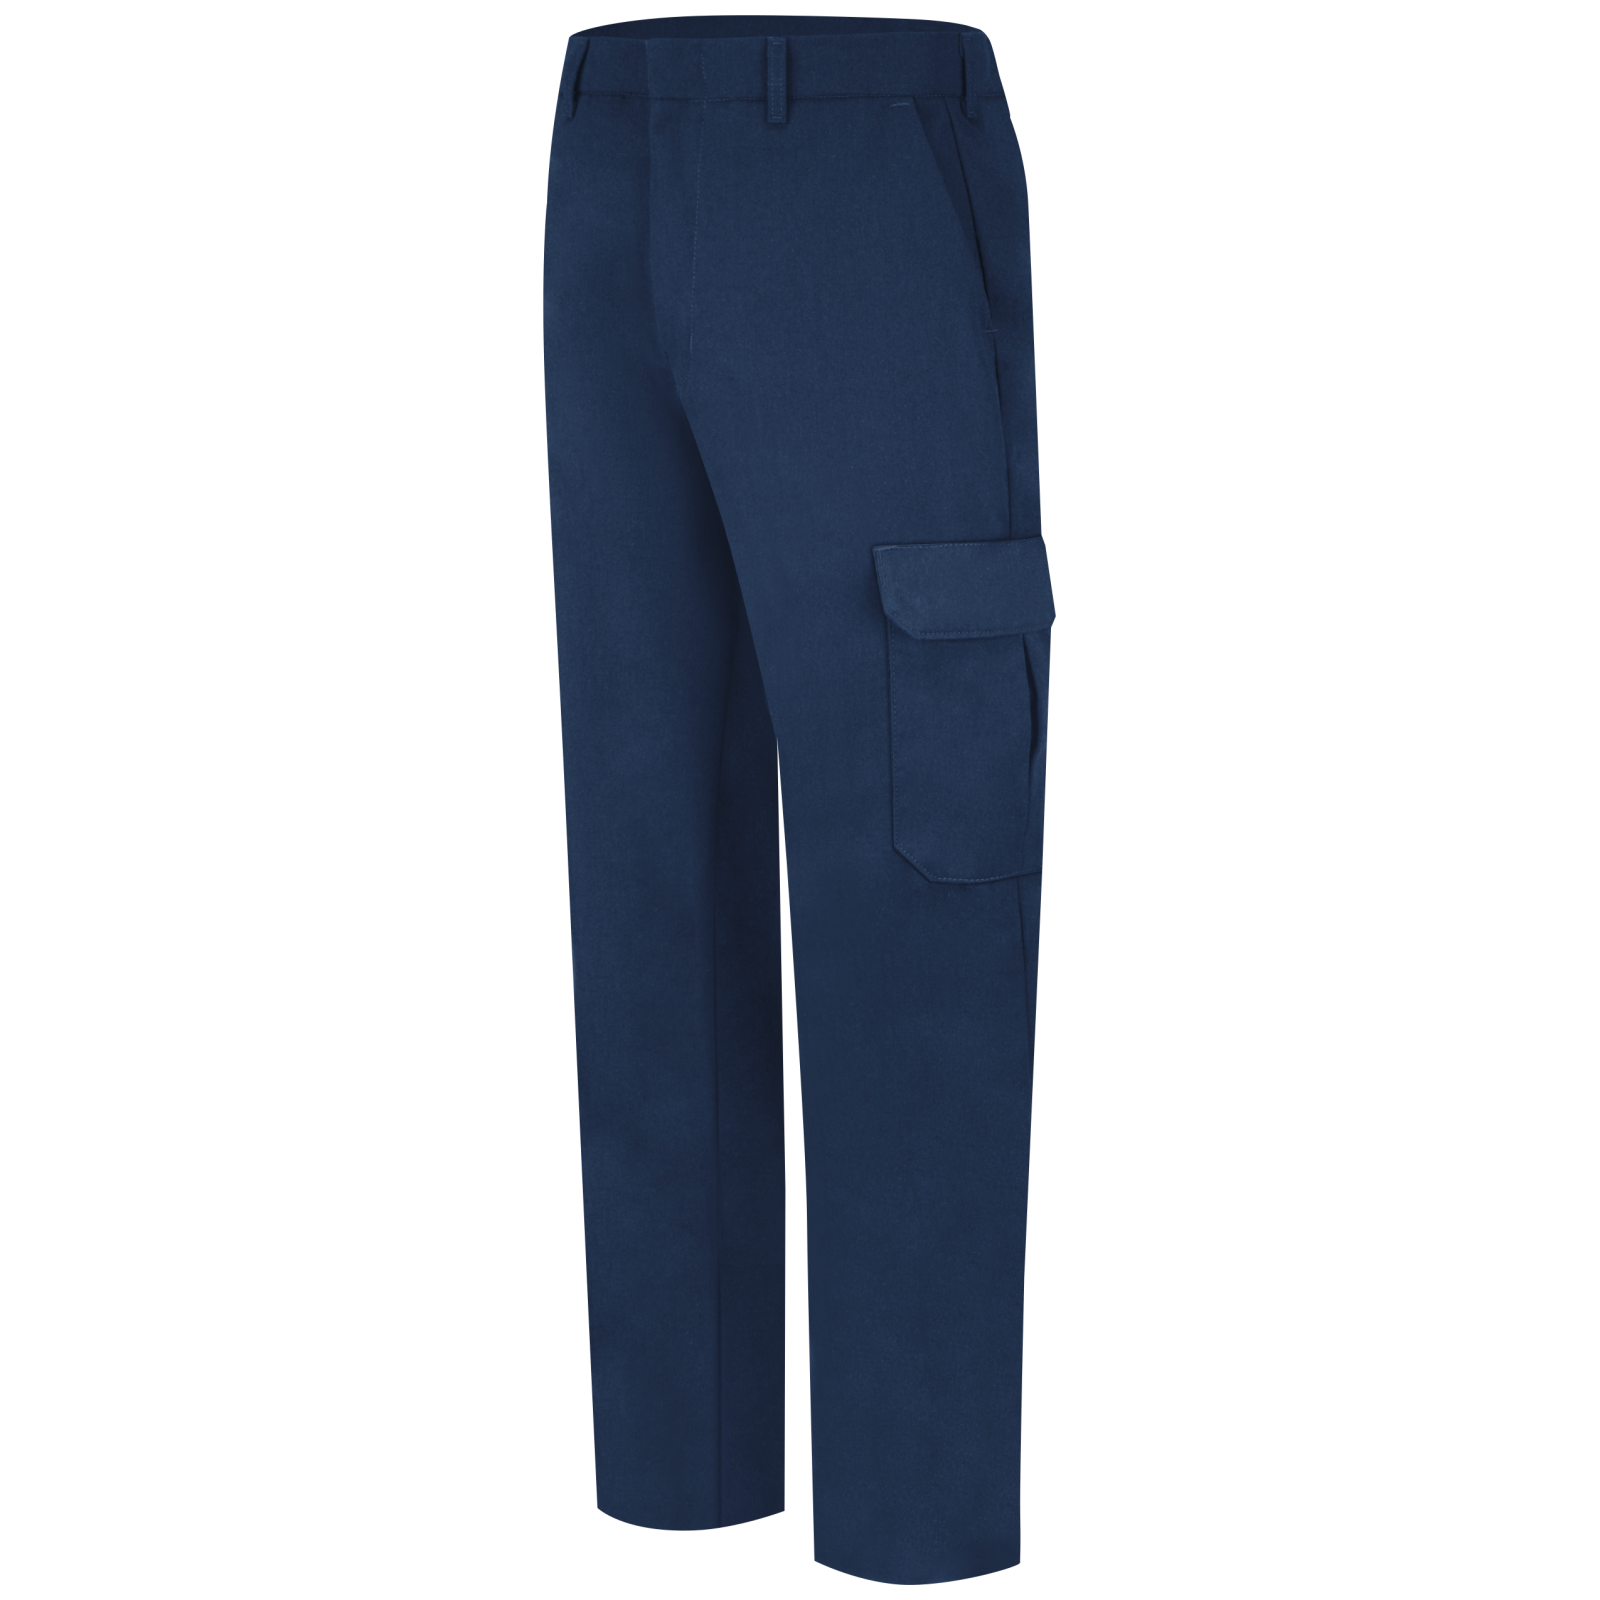 2-in-1 pants?! Add to cart, asap!! 🛒♡ Found these easy cargo pants fr, Cargo  Pants